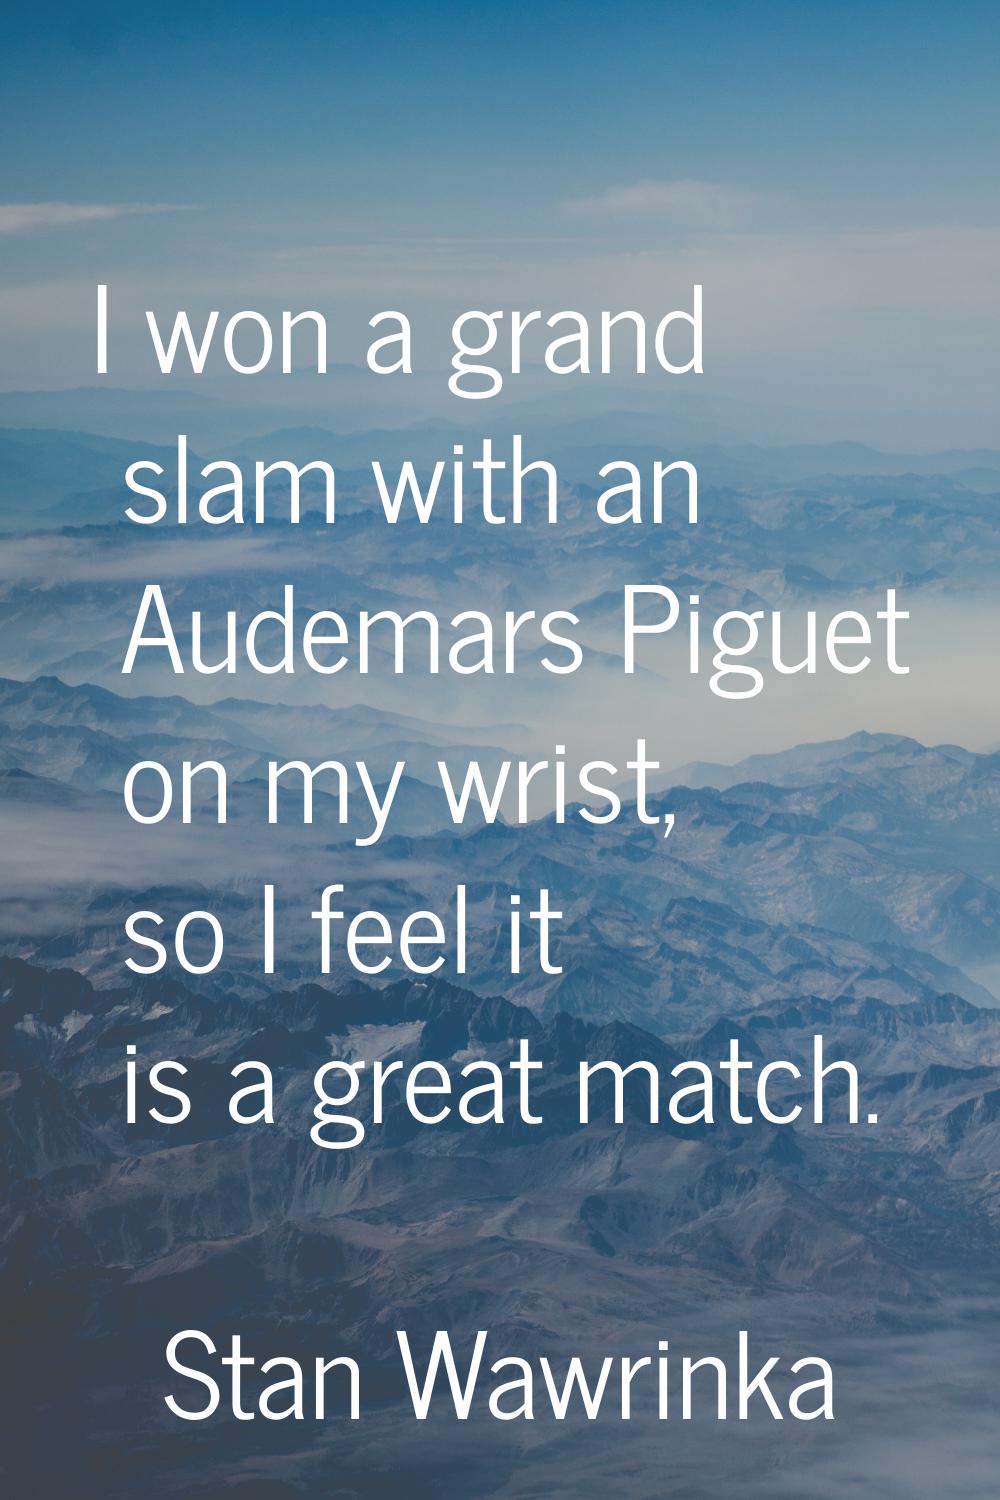 I won a grand slam with an Audemars Piguet on my wrist, so I feel it is a great match.